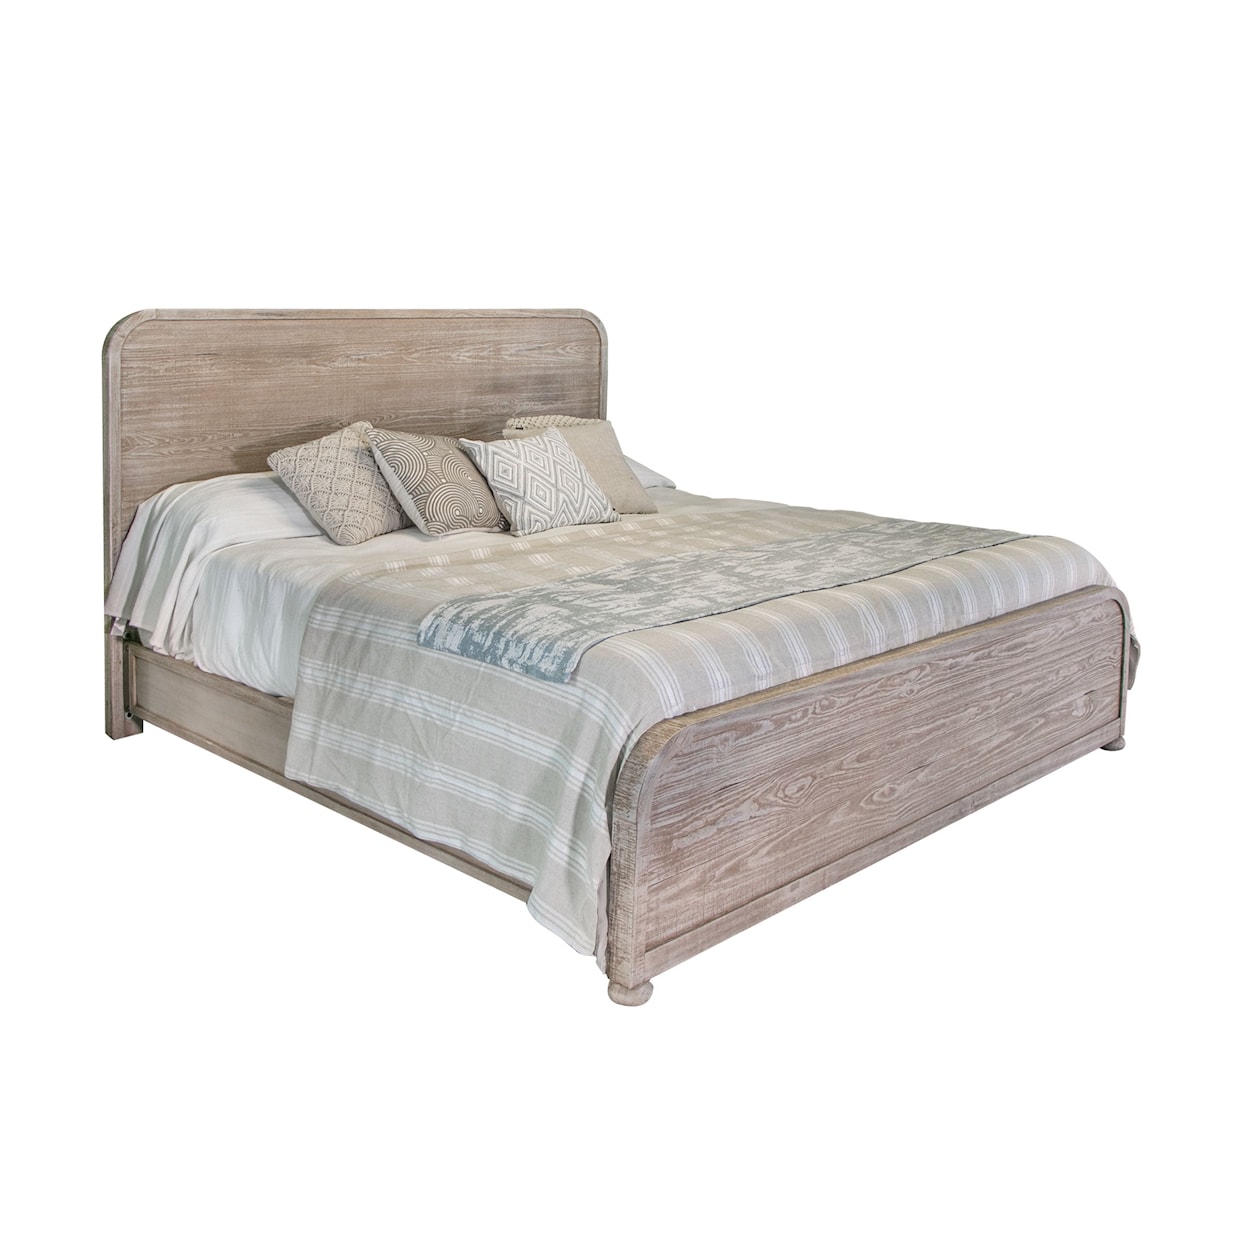 International Furniture Direct Nizuc Bedroom Collection King Bed